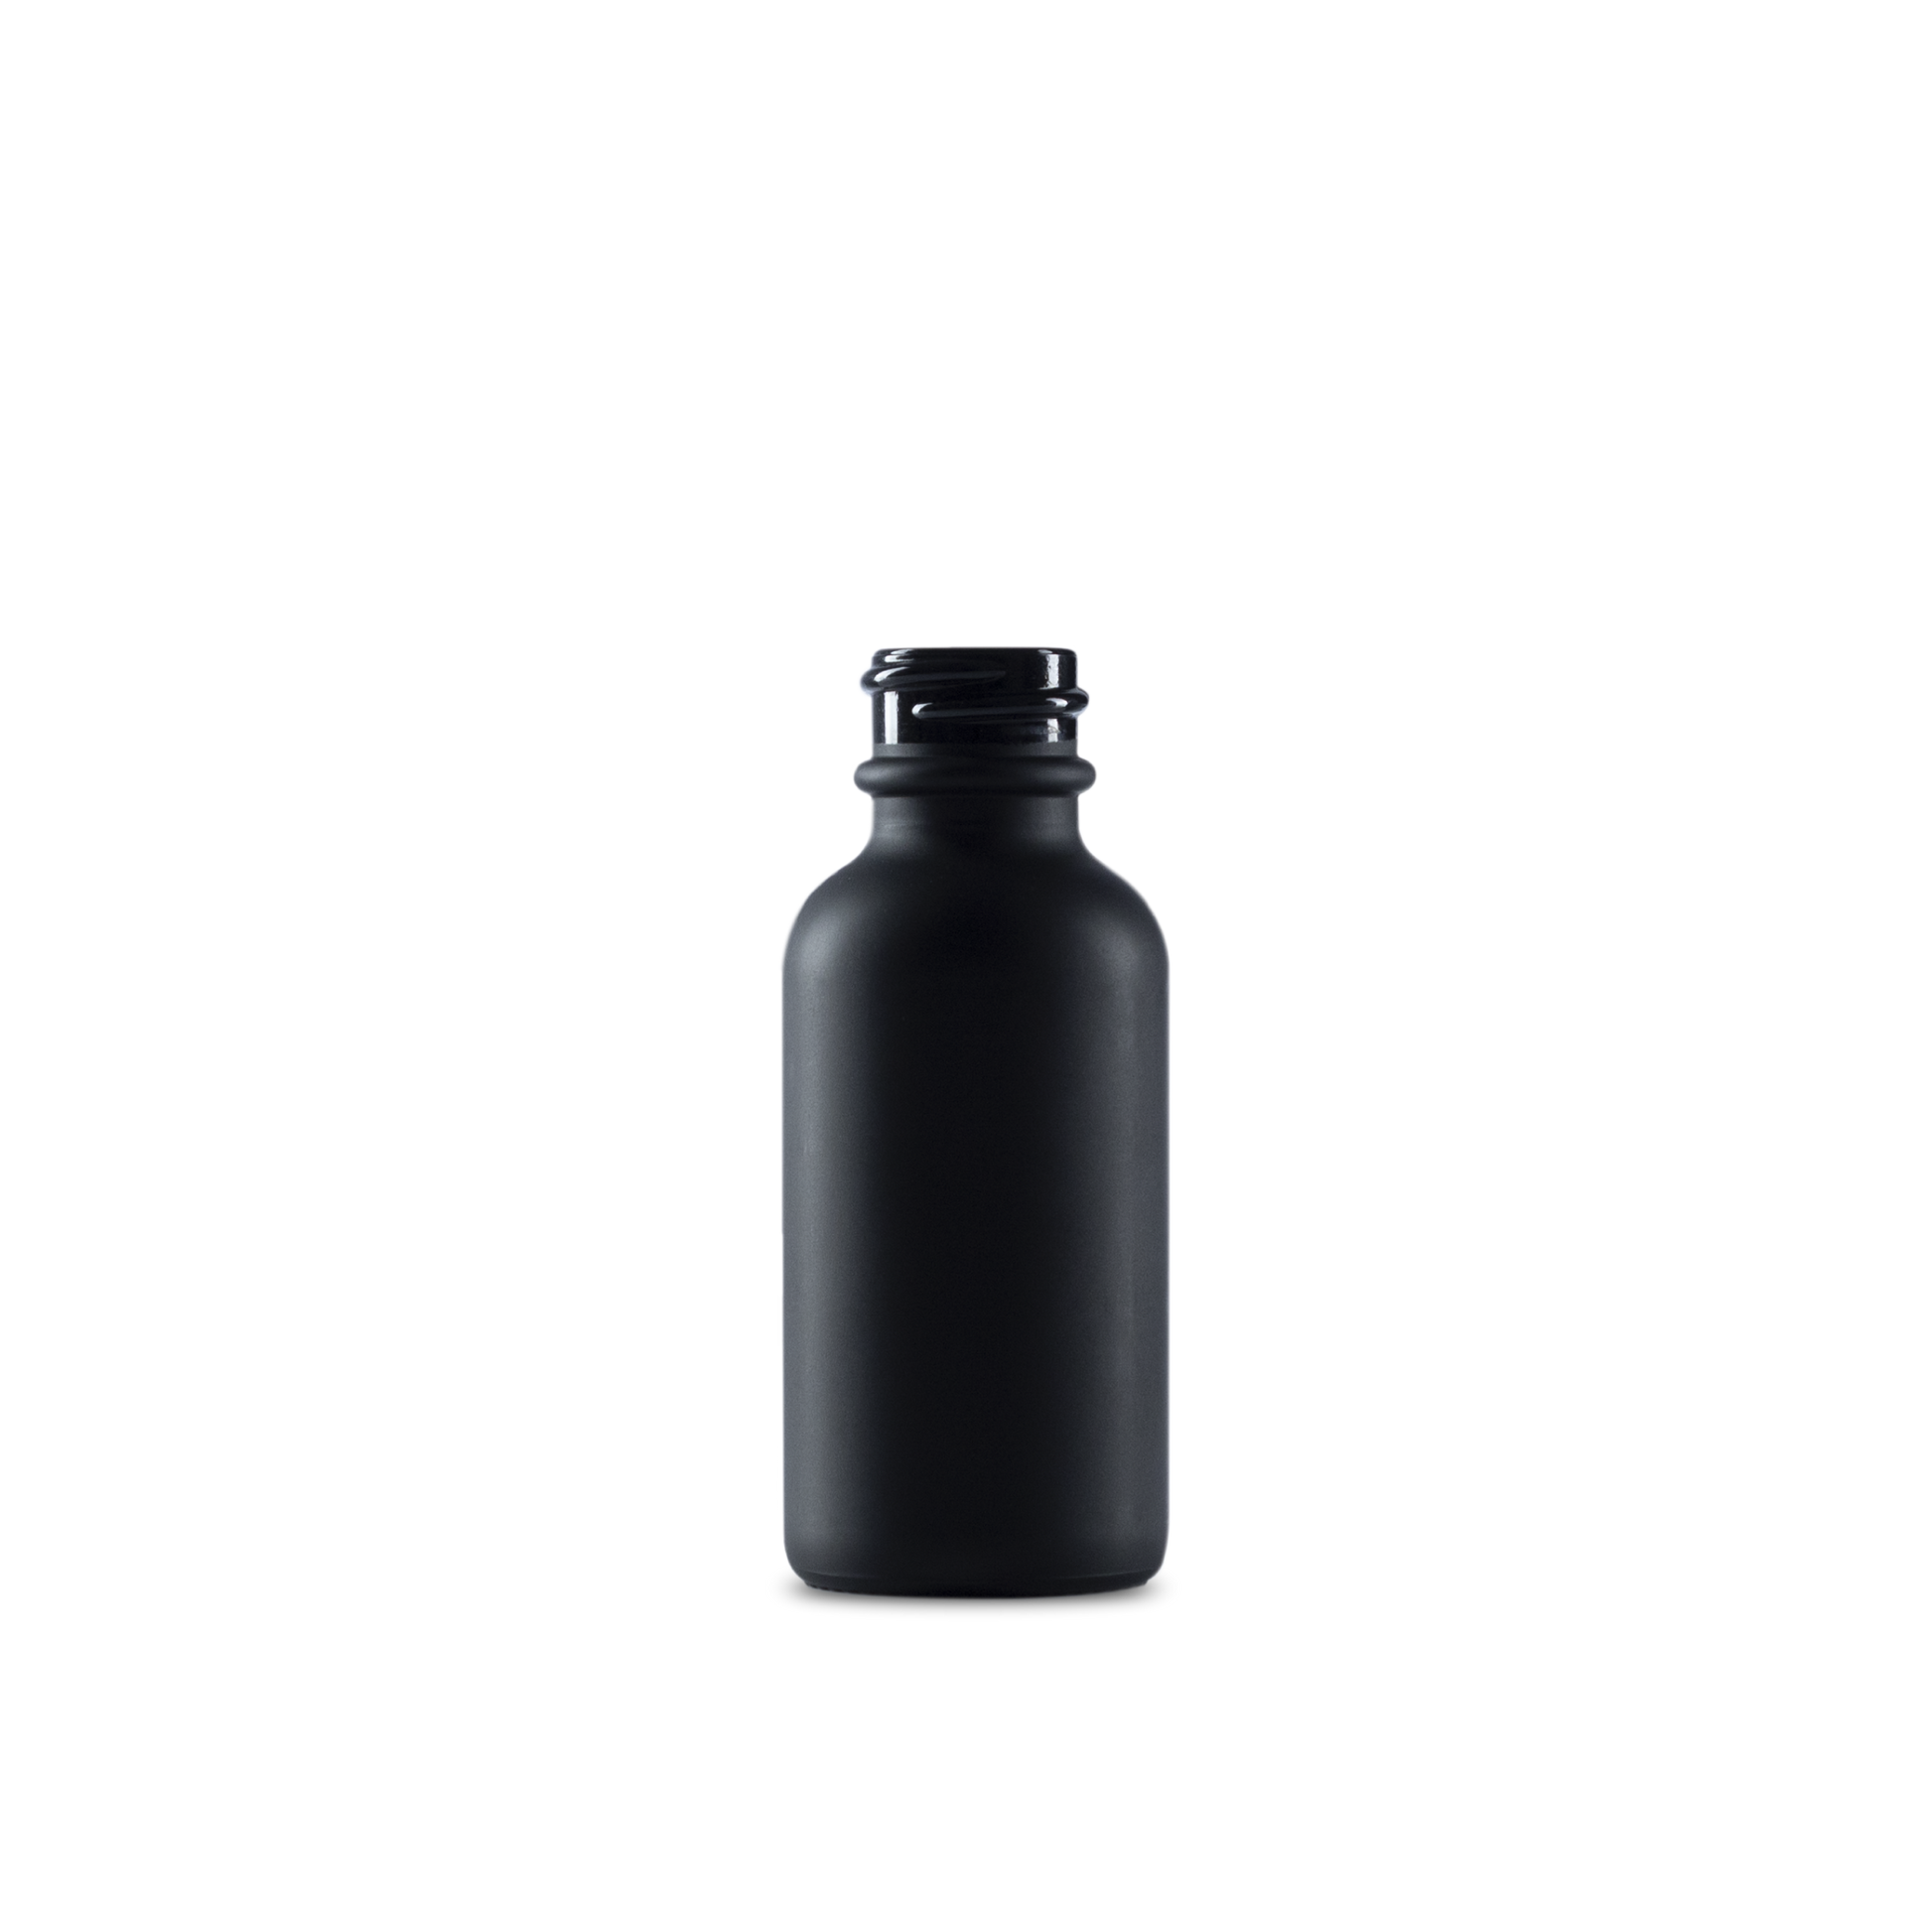 1oz black frosted bottles are made from a type of glass called borosilicate and are the perfect size for packaging a variety of liquids.